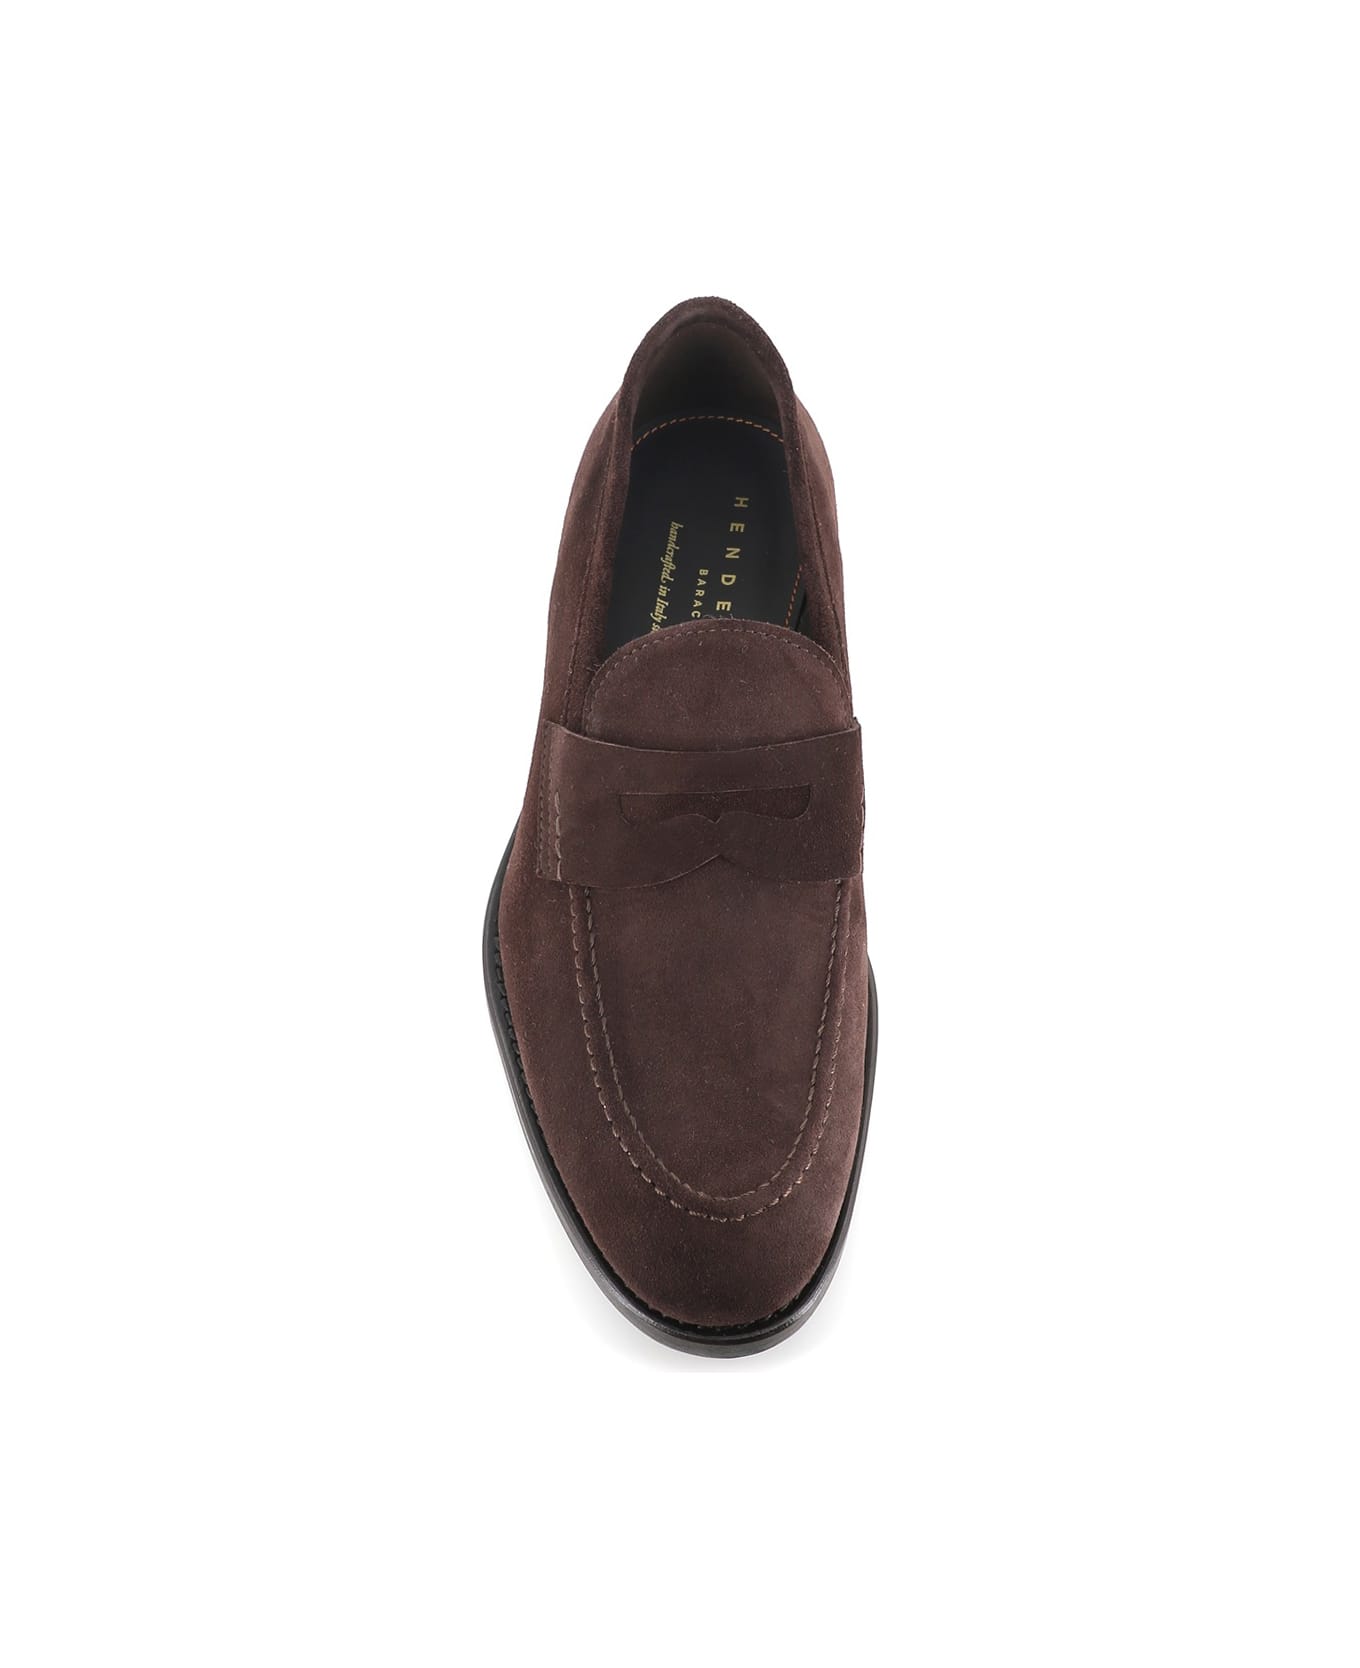 Henderson Baracco Classic Penny Loafers "51405b" - Brown